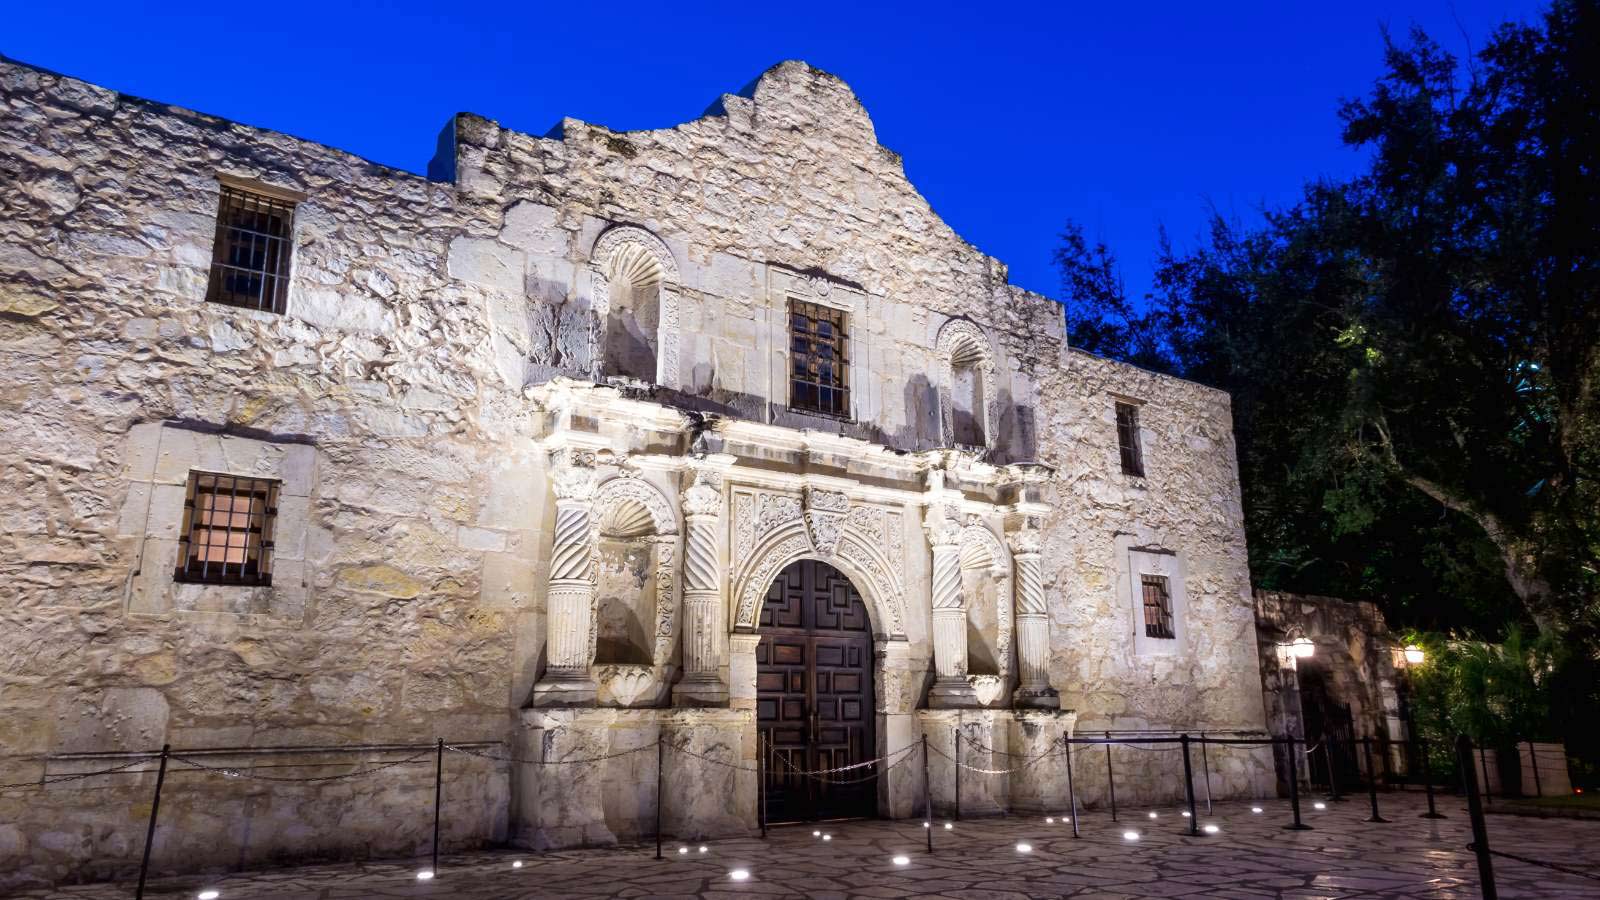 <p>The Alamo is a historical site that is known for the Battle of the Alamo, which took place in 1836. Visitors can tour the grounds and learn about the history of the Texas Revolution.</p>